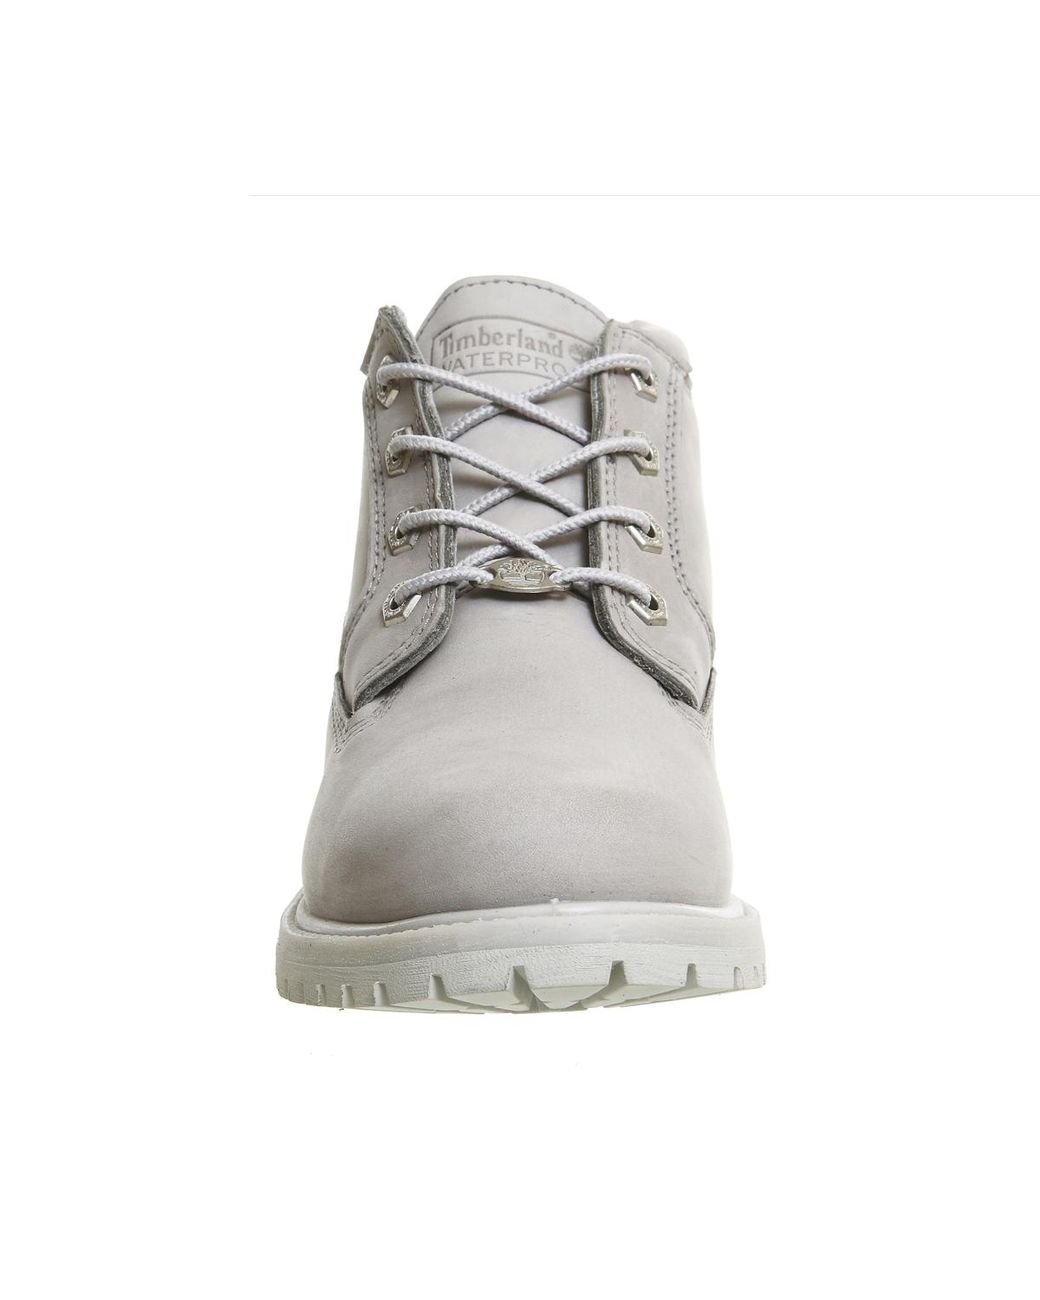 Timberland Nellie Chukka Double Waterproof Boots in Gray | Lyst